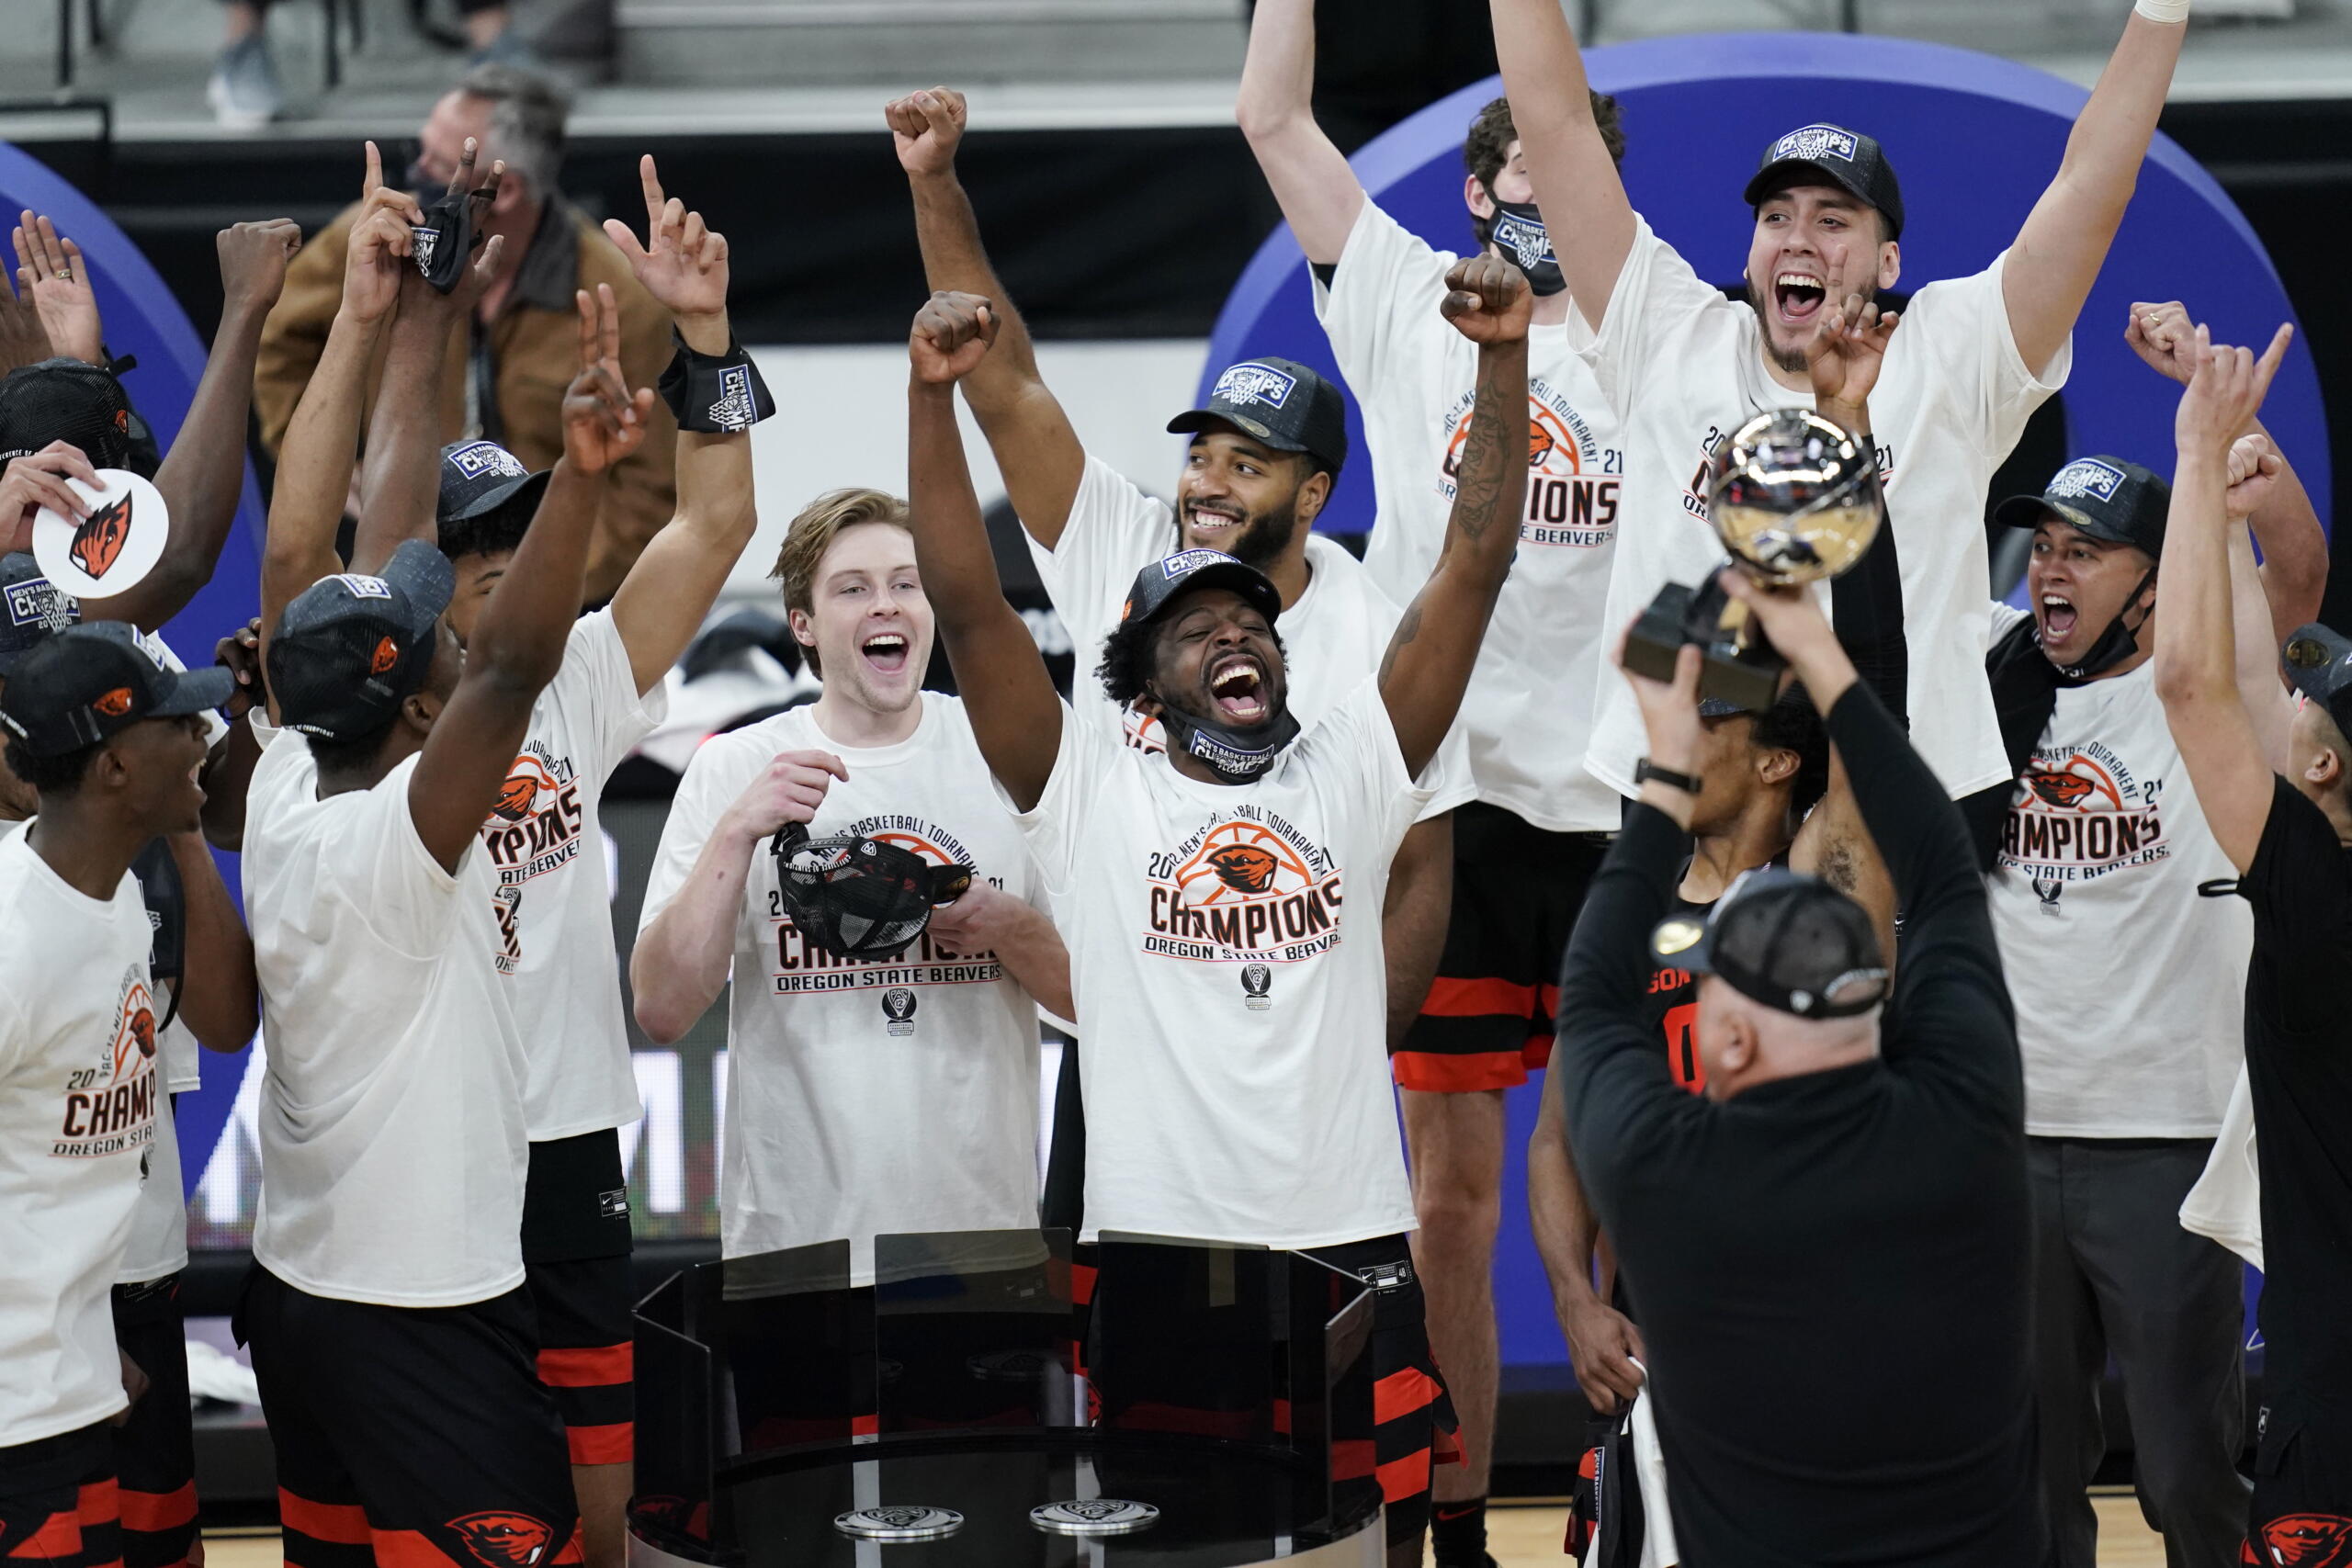 Oregon State players celebrate after defeating Colorado in an NCAA college basketball game in the championship of the Pac-12 men's tournament Saturday, March 13, 2021, in Las Vegas.